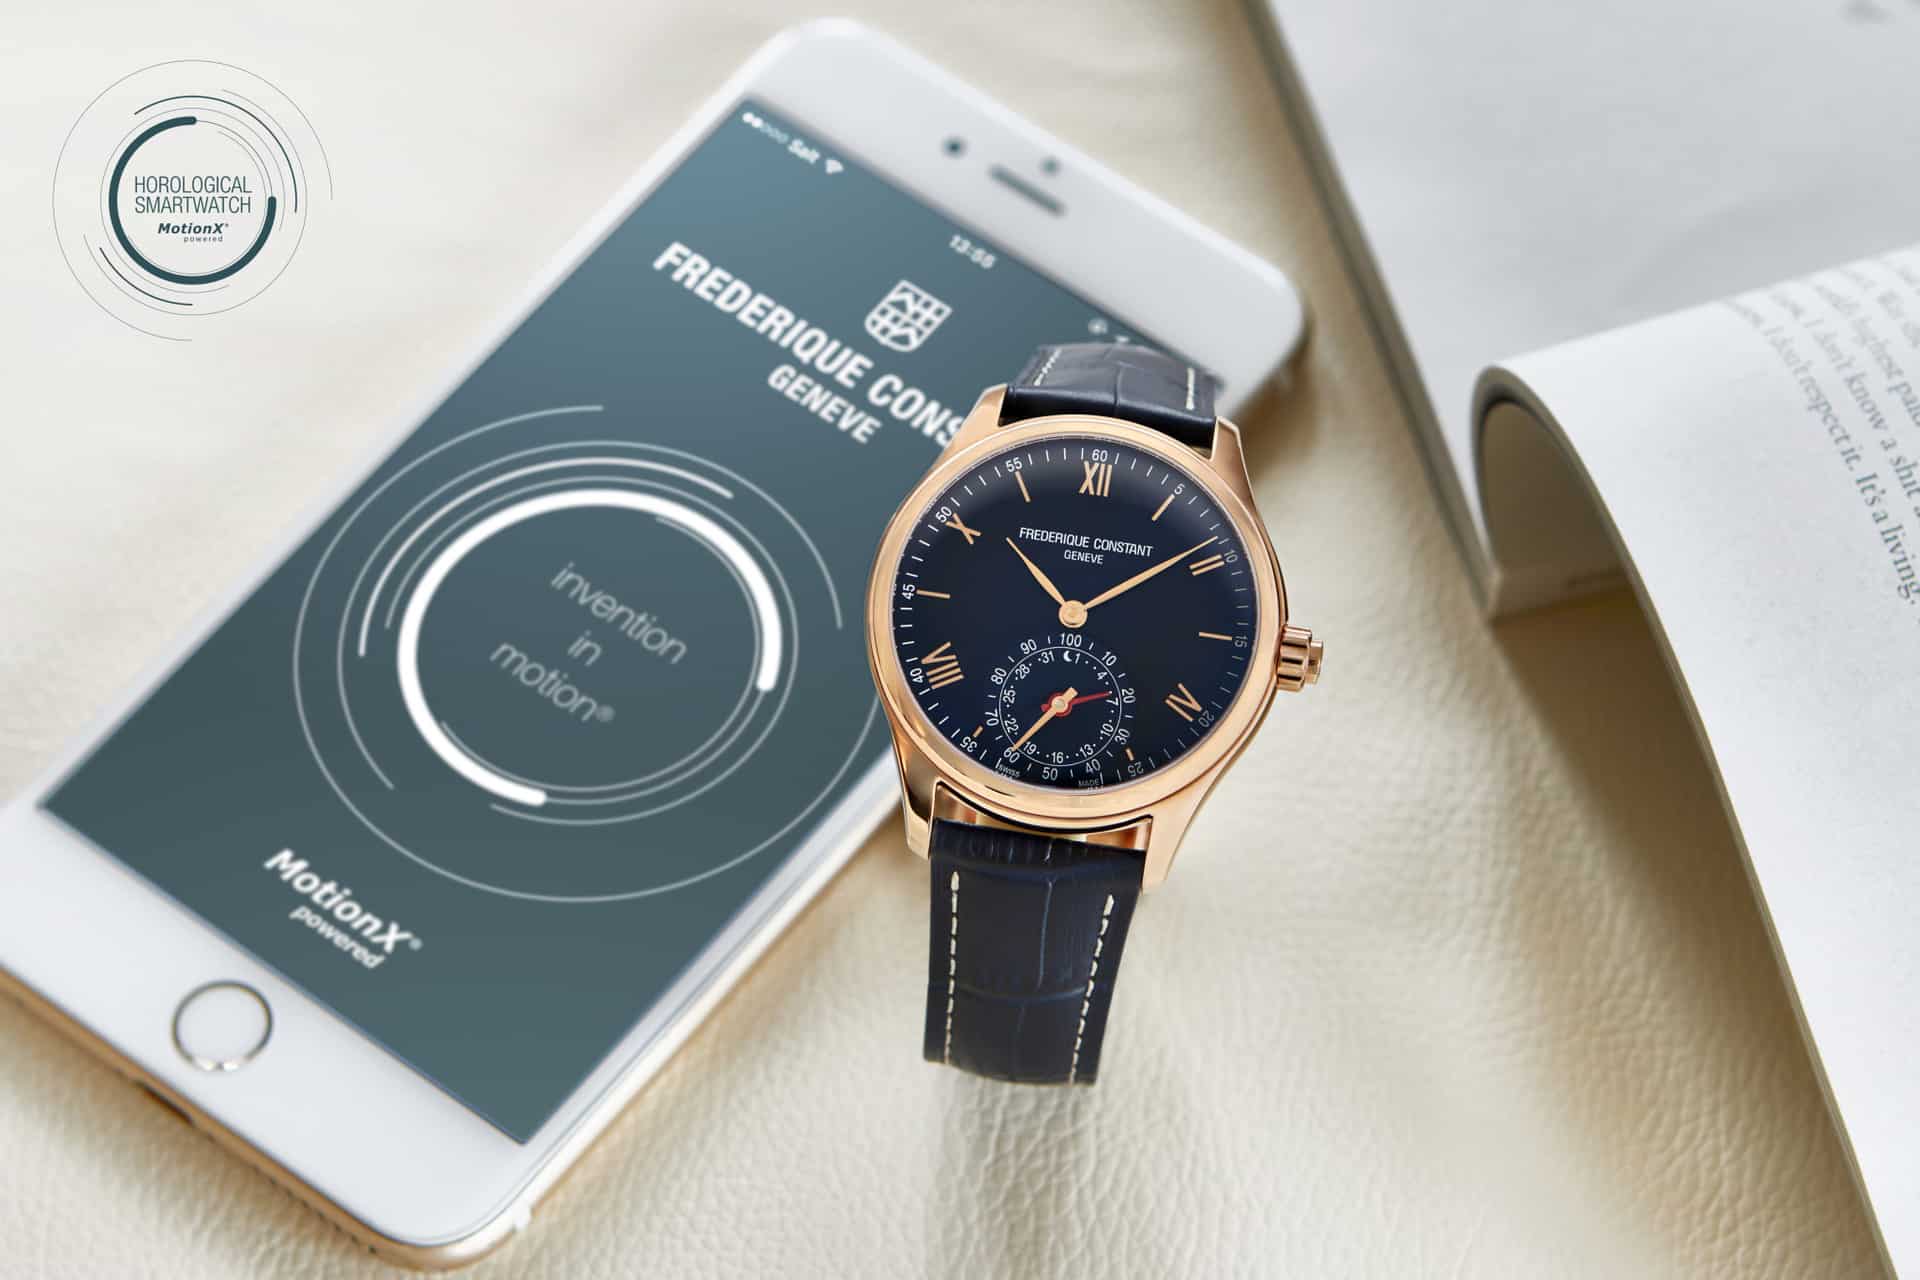 Frederique Constant offers new Horological Smartwatch, powered by MotionX®